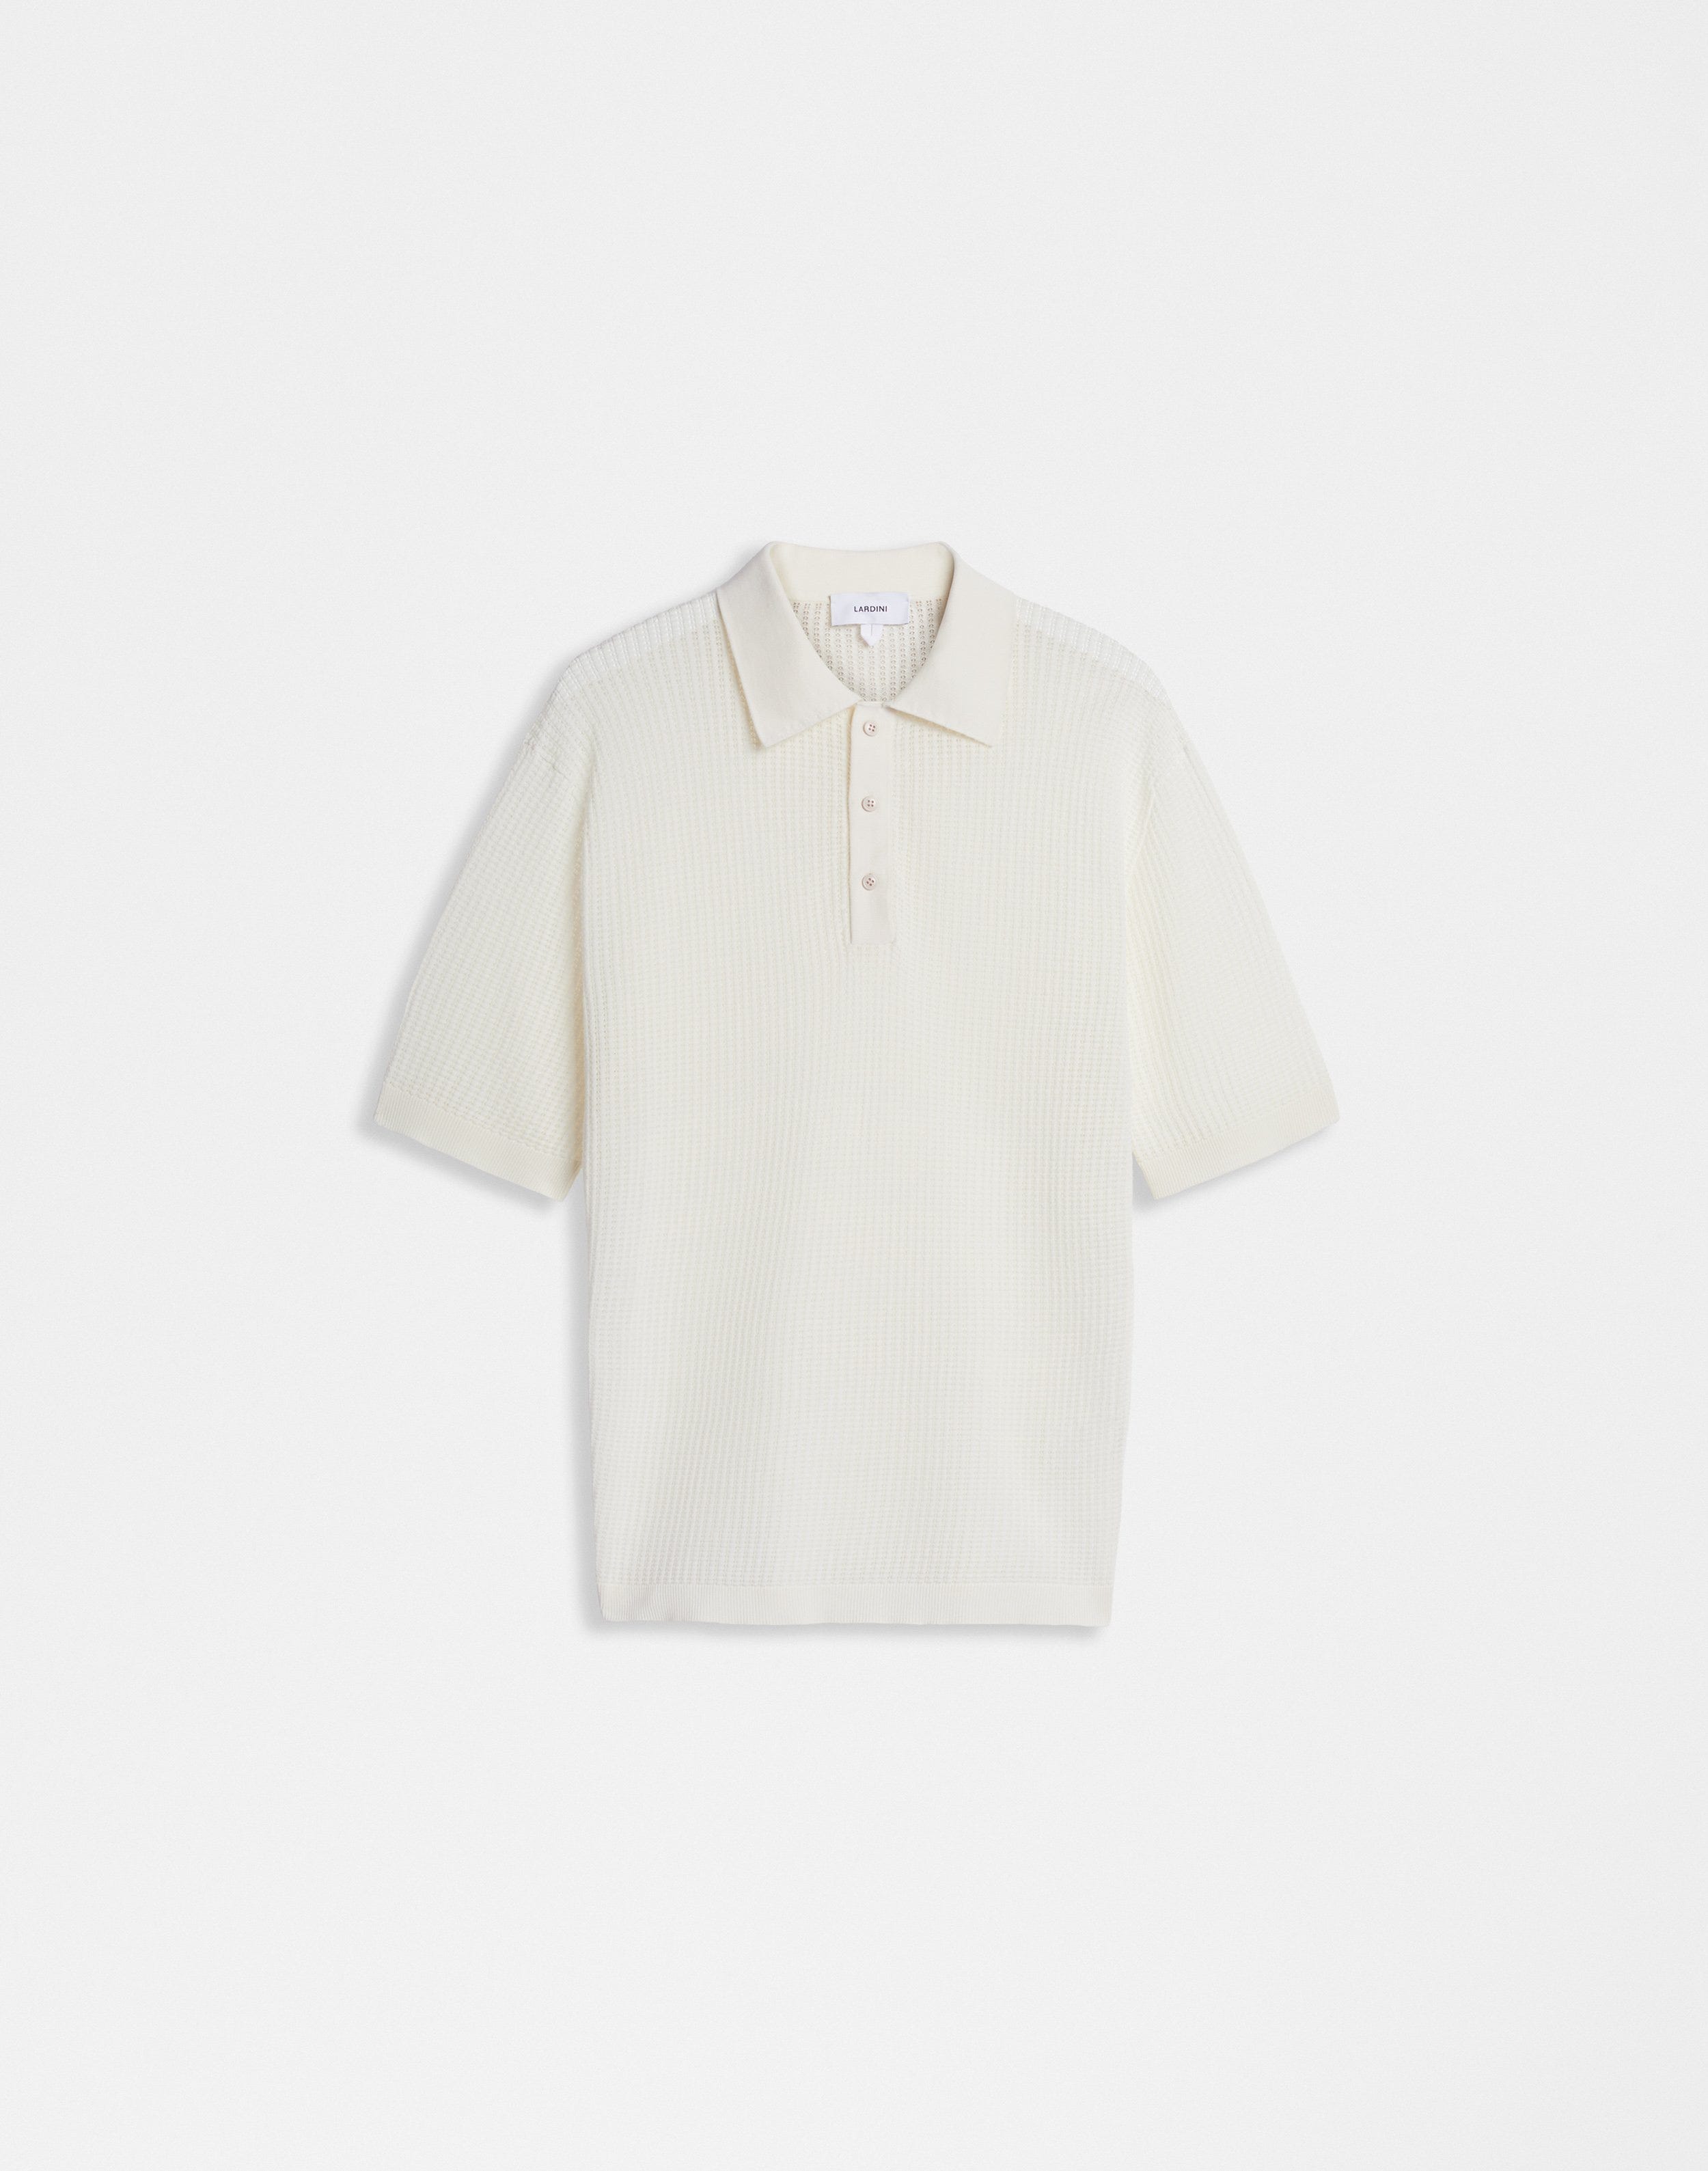 White polo shirt with an openwork knit